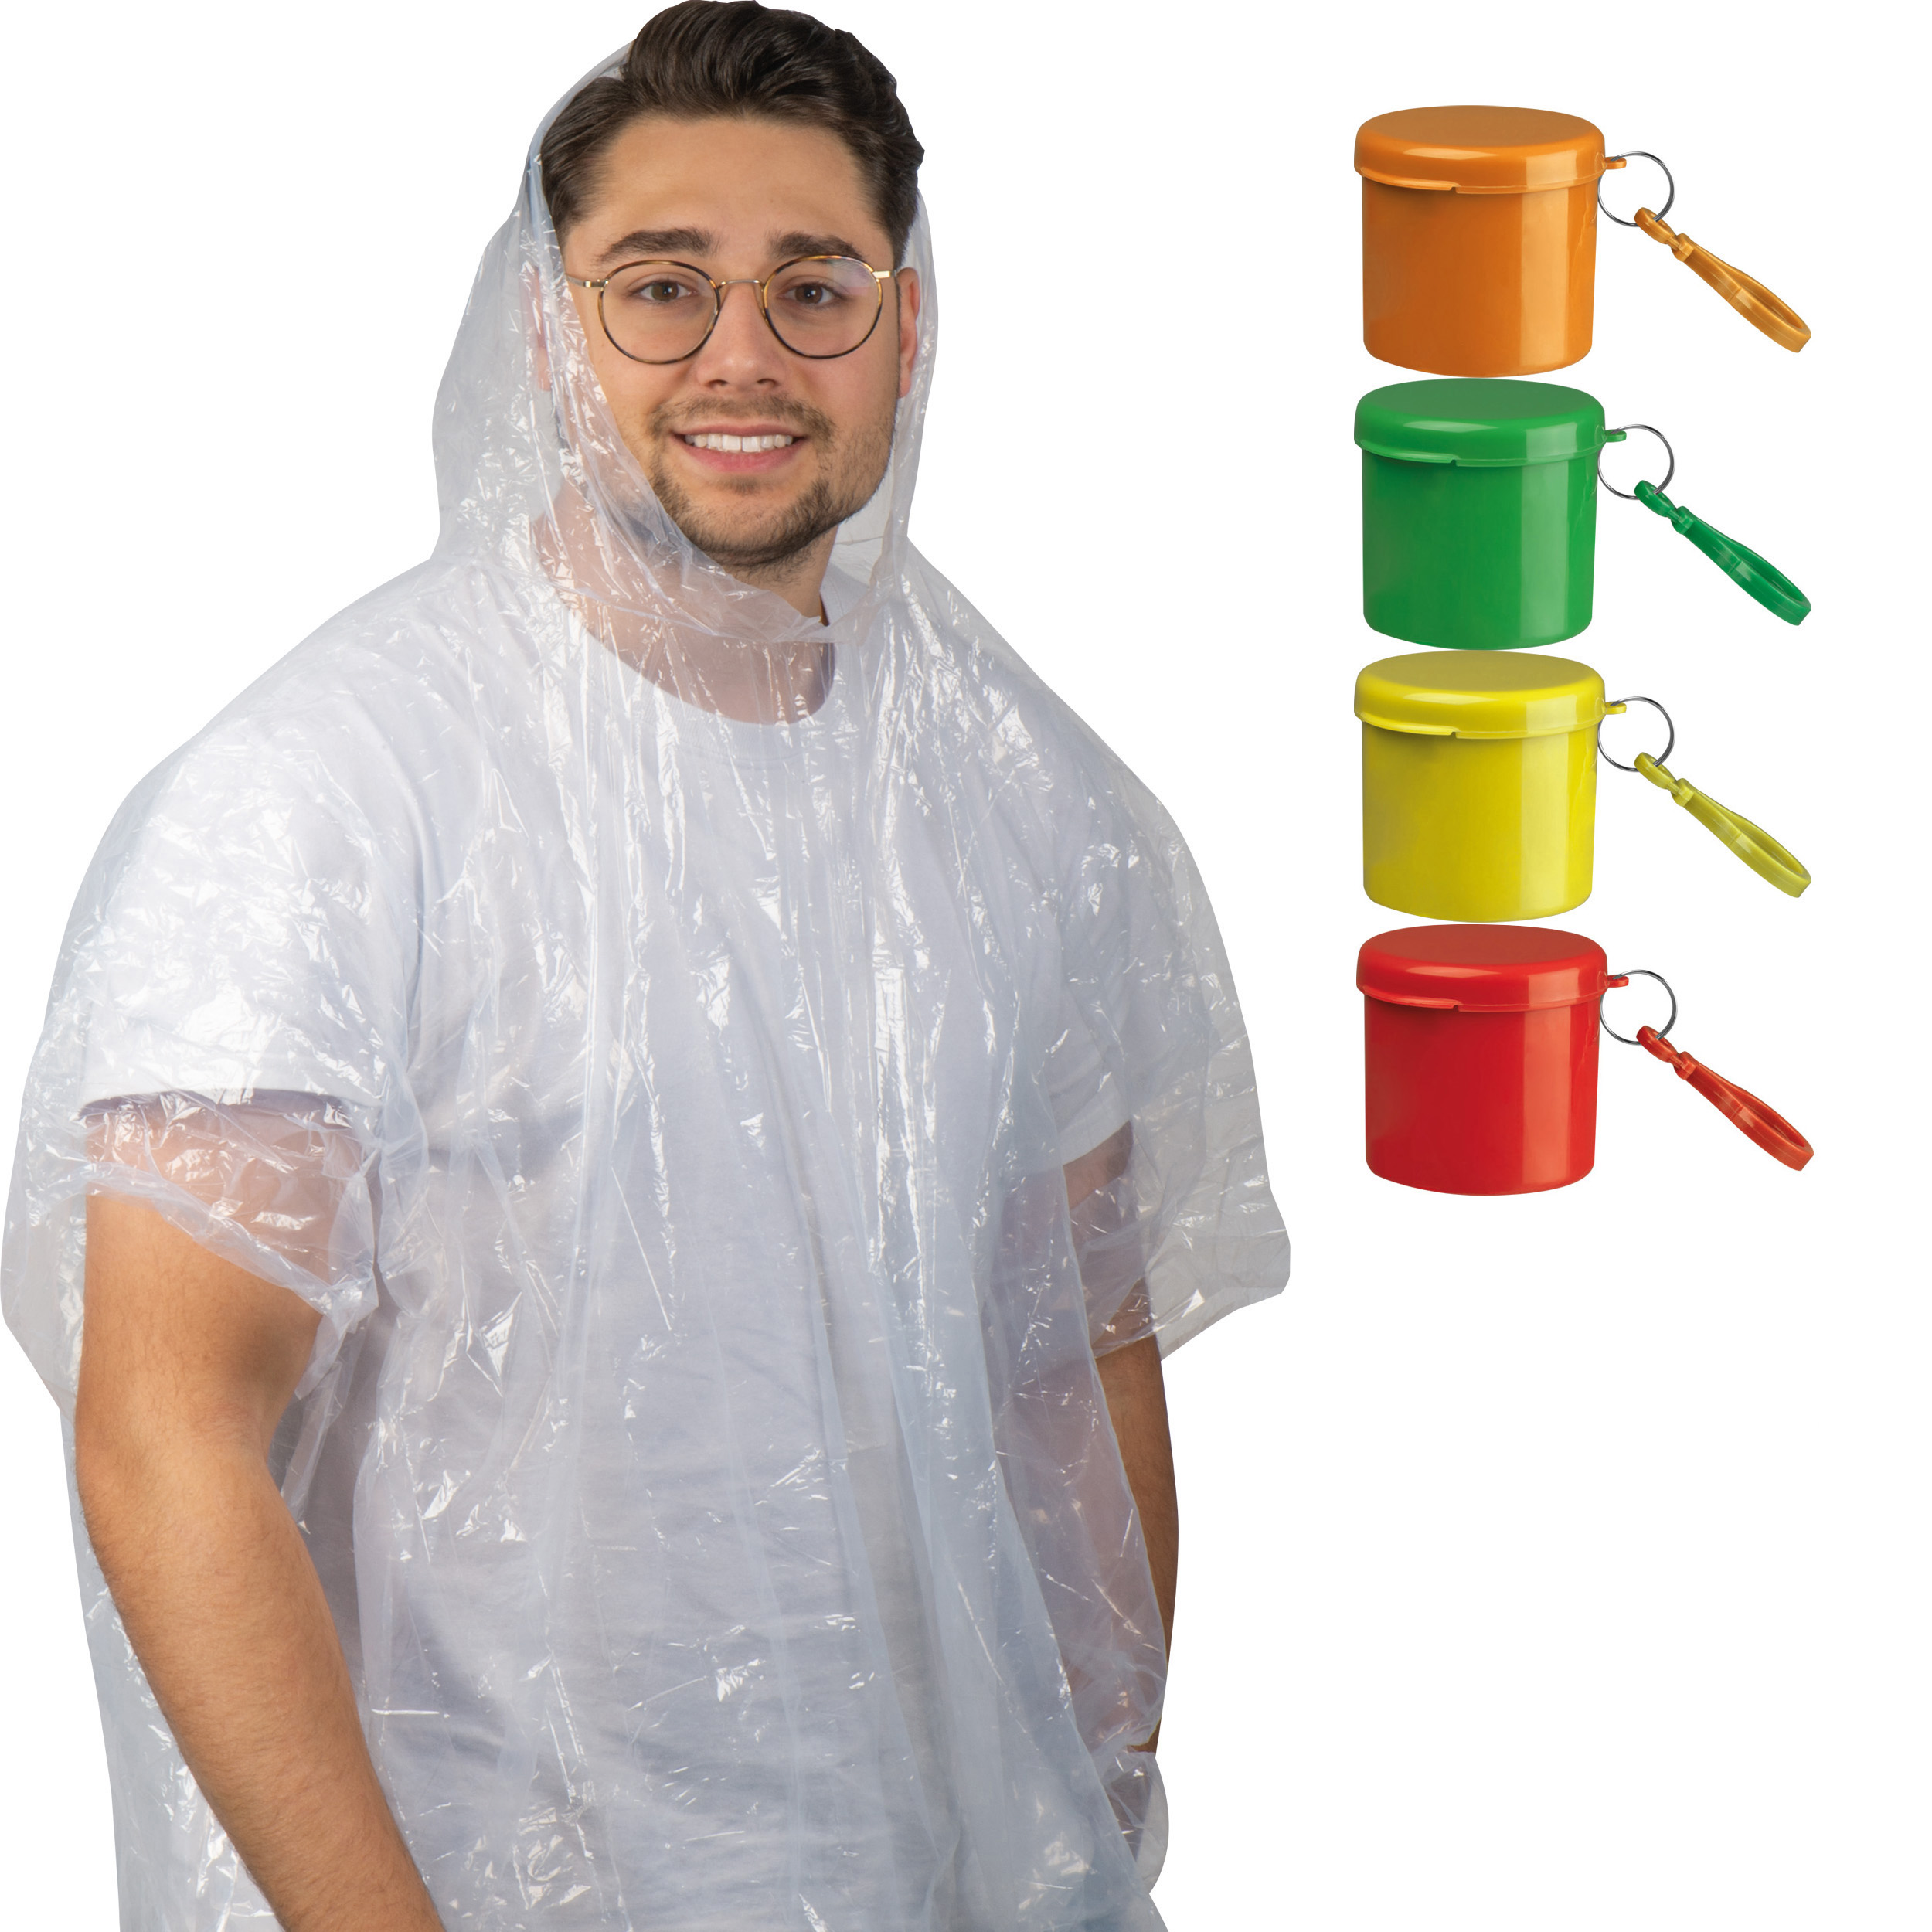 Rainponcho with portable can